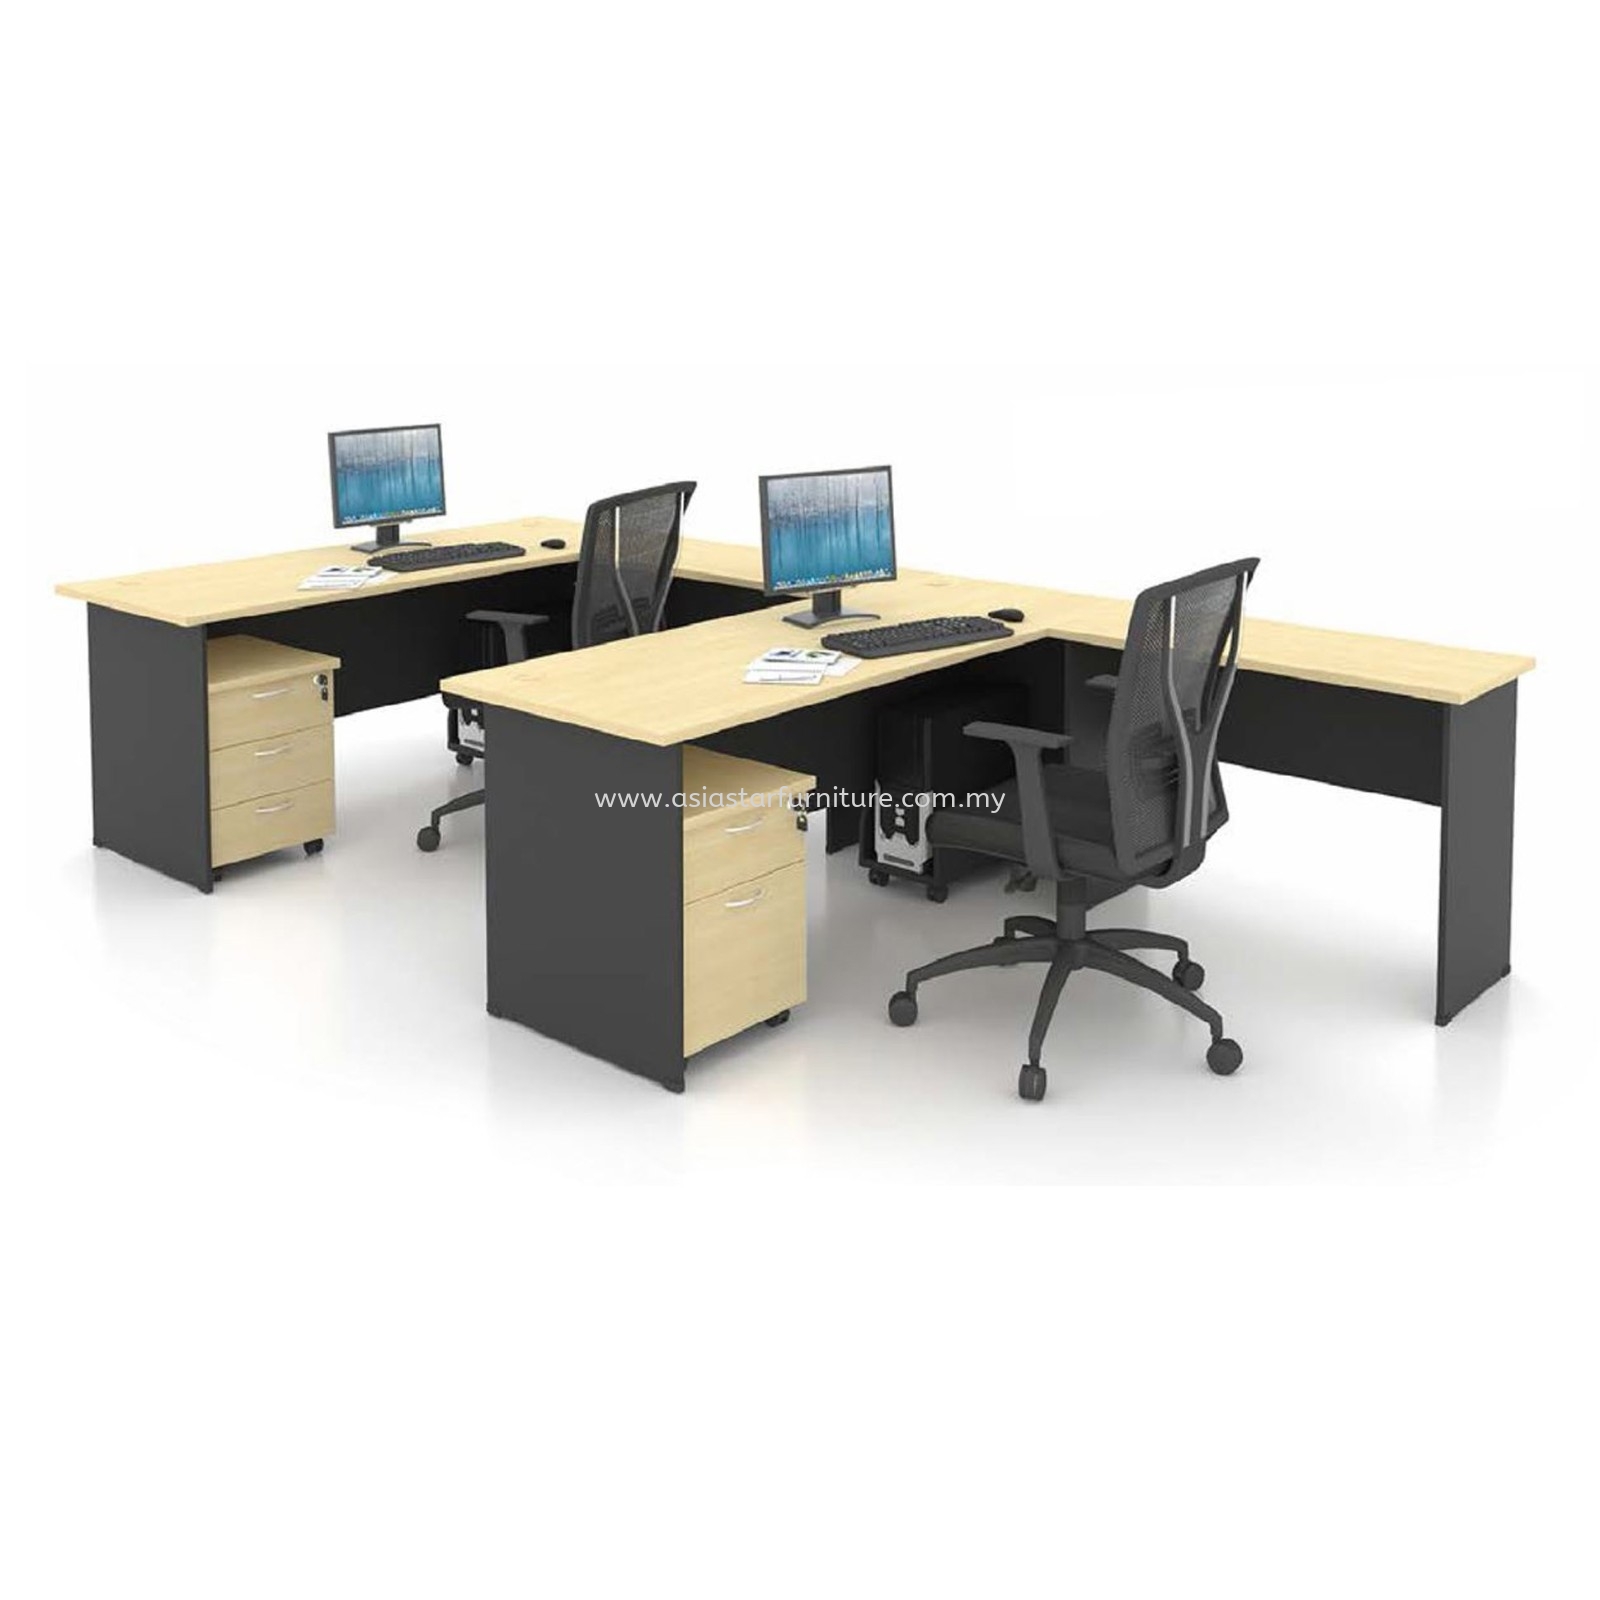 5' OFFICE TABLE | COMPUTER TABLE | STUDY TABLE C/W SIDE TABLE AND DRAWER 1D1F SET - office table KL-PJ-Selangor-Malaysia | office table Sungai Buloh | office table Bangsar | office table Kelana Jaya